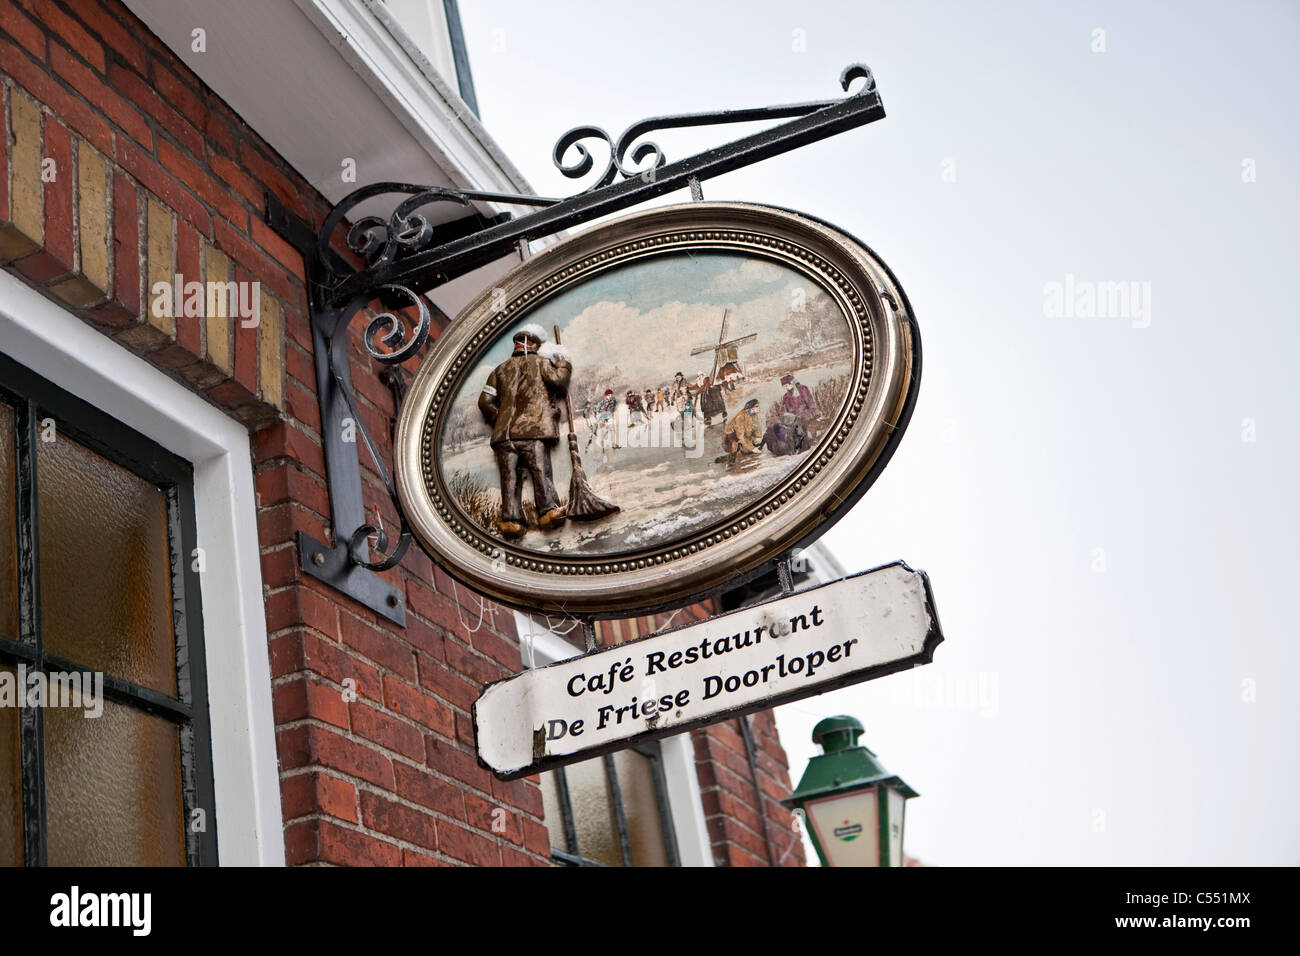 The Netherlands, Hindeloopen, Dutch capital of ice skating culture. Outdoor sign of restaurant of Skating or Skate Museum. Stock Photo